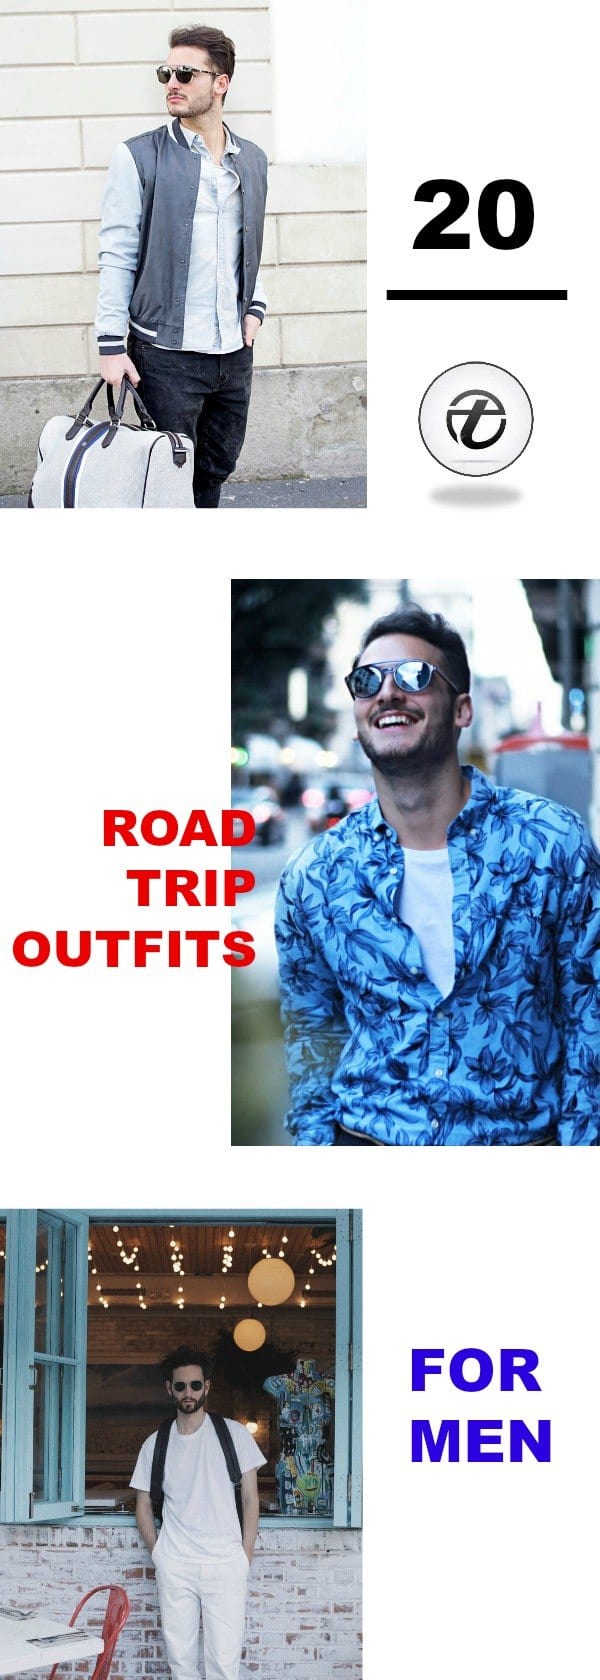 Men Road Trip Outfits-29 Ideas on What to Wear for a Road Trip